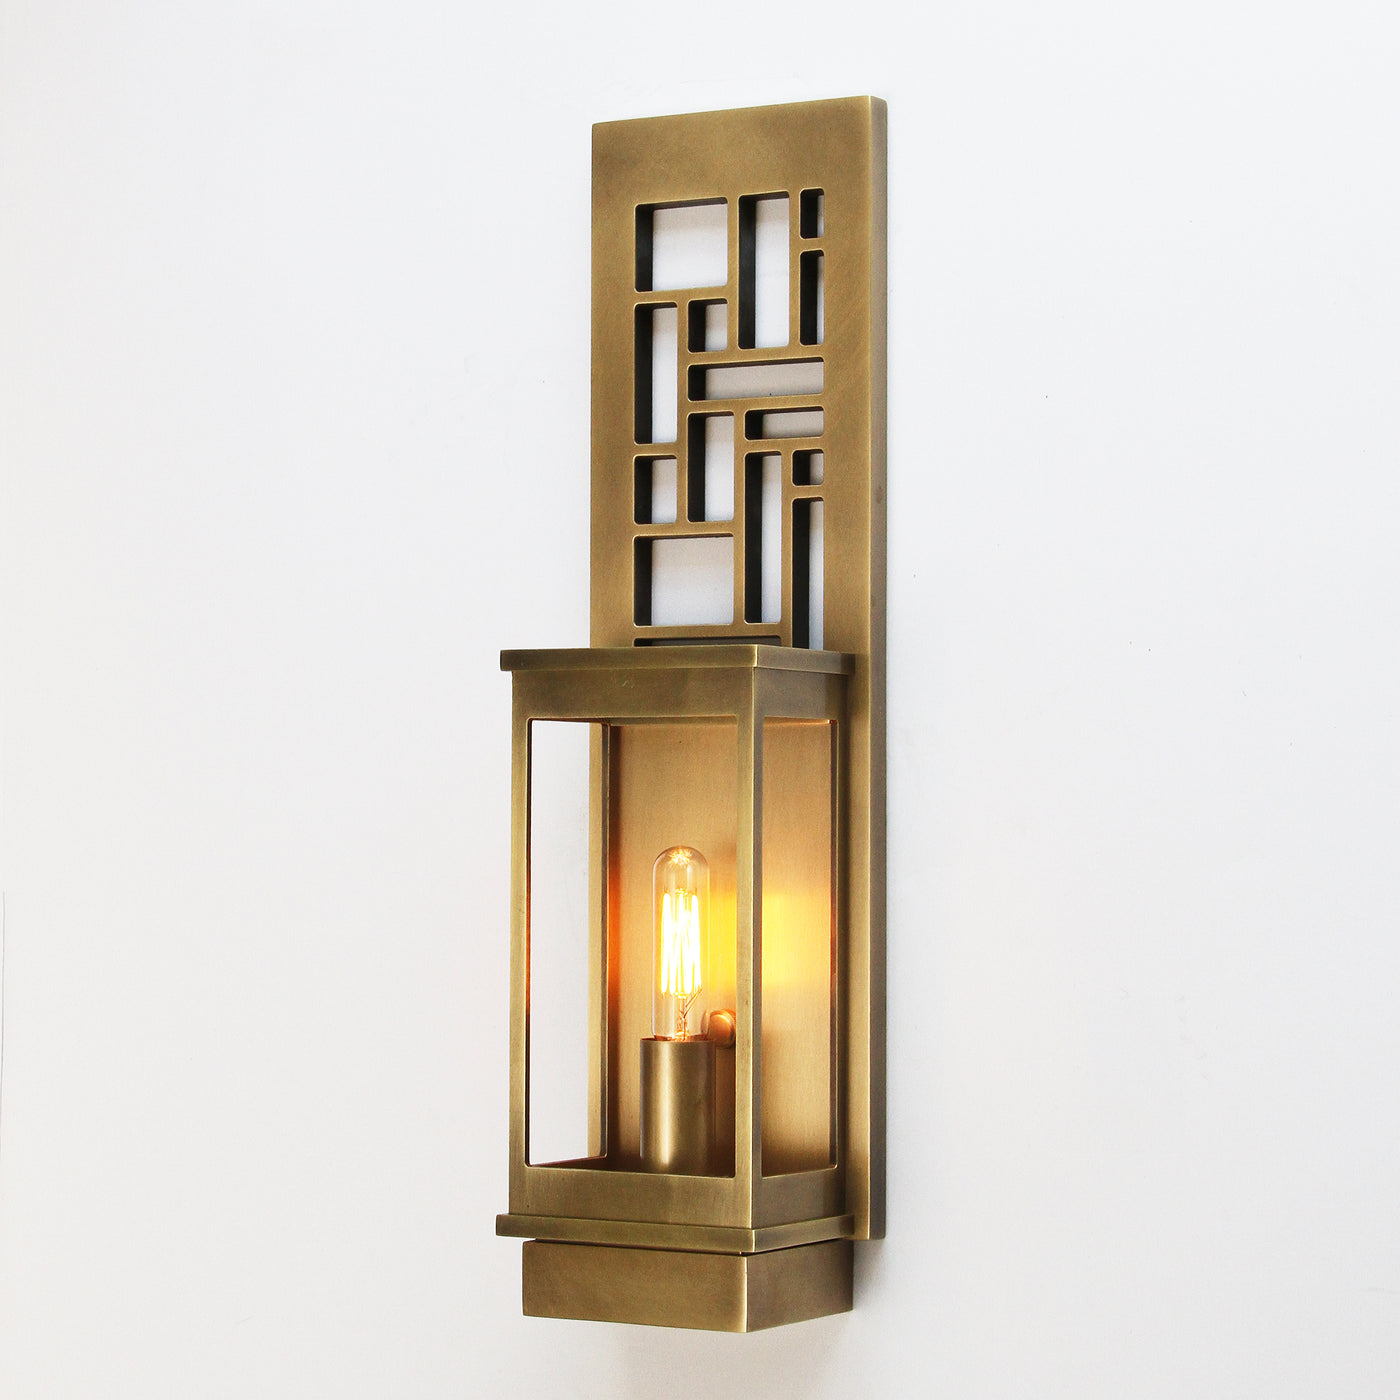 Rectilinear Mosaic Wall Sconce - 4028